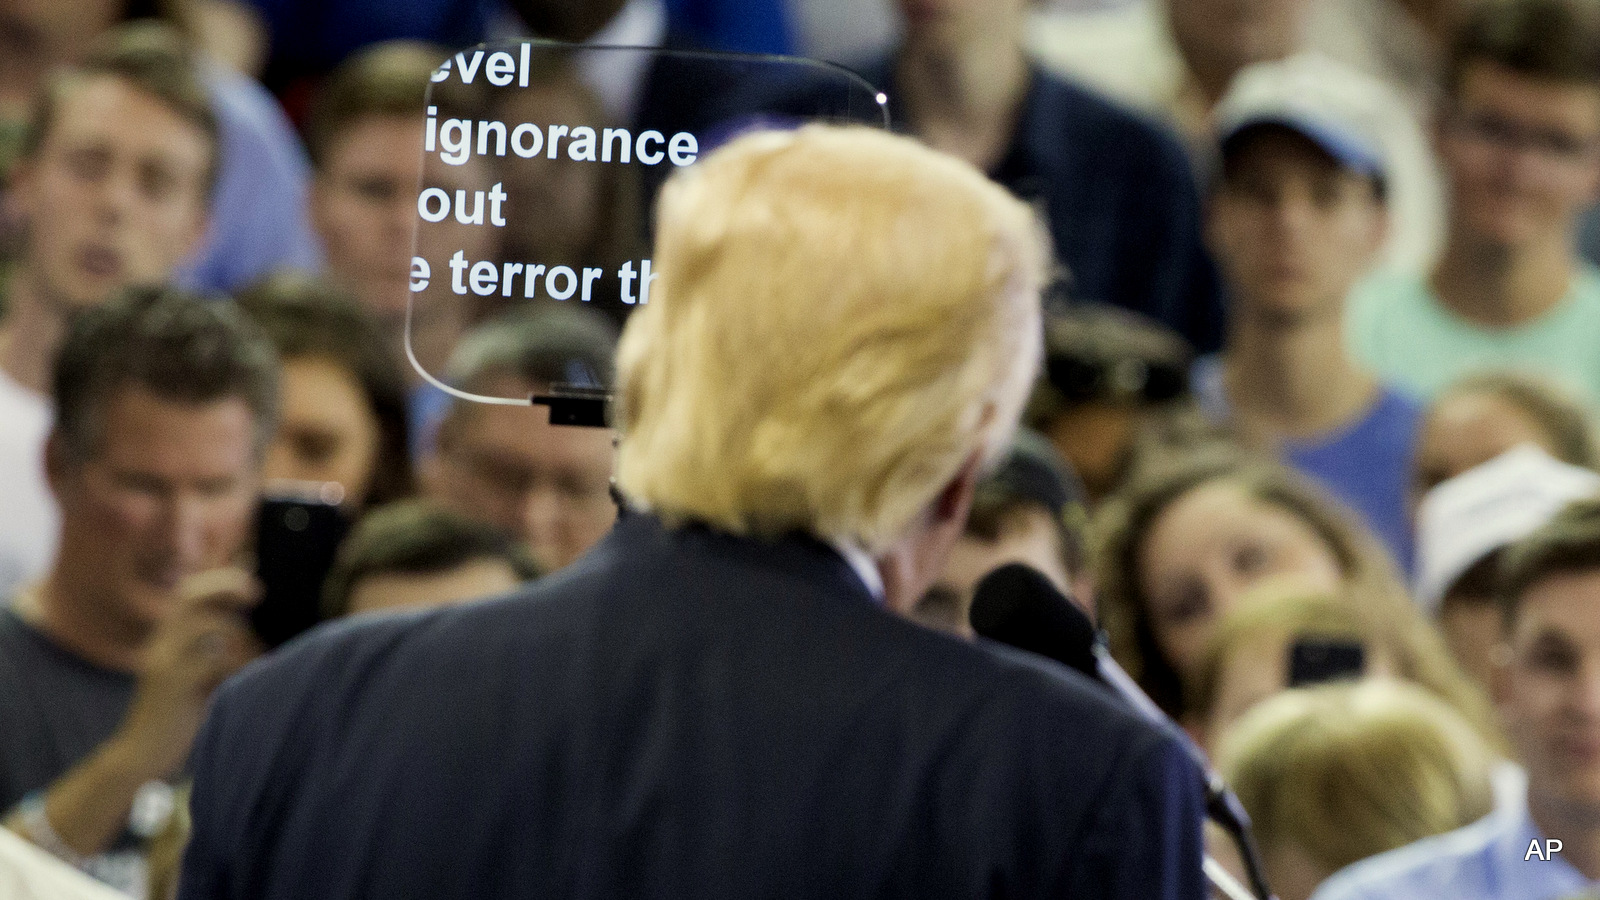 Republican presidential candidate Donald Trump reads off a teleprompter during a campaign rally at High Point University, Tuesday, Sept. 20, 2016, in High Point, N.C.